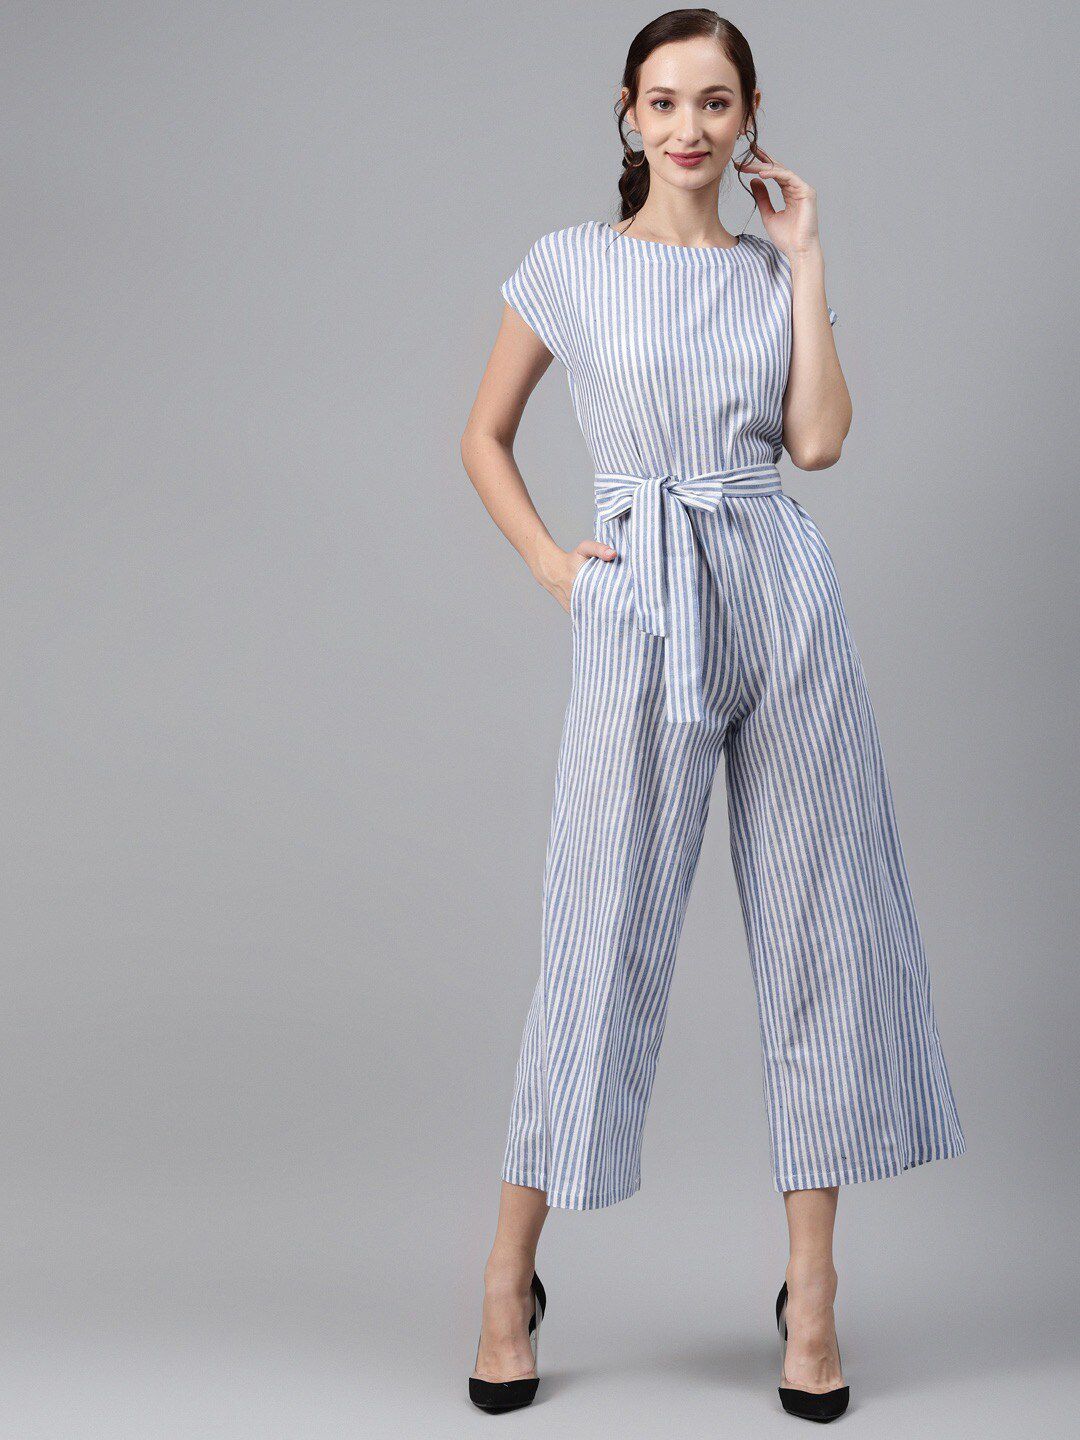 Cottinfab Blue & White Striped Cotton Culotte Jumpsuit Price in India